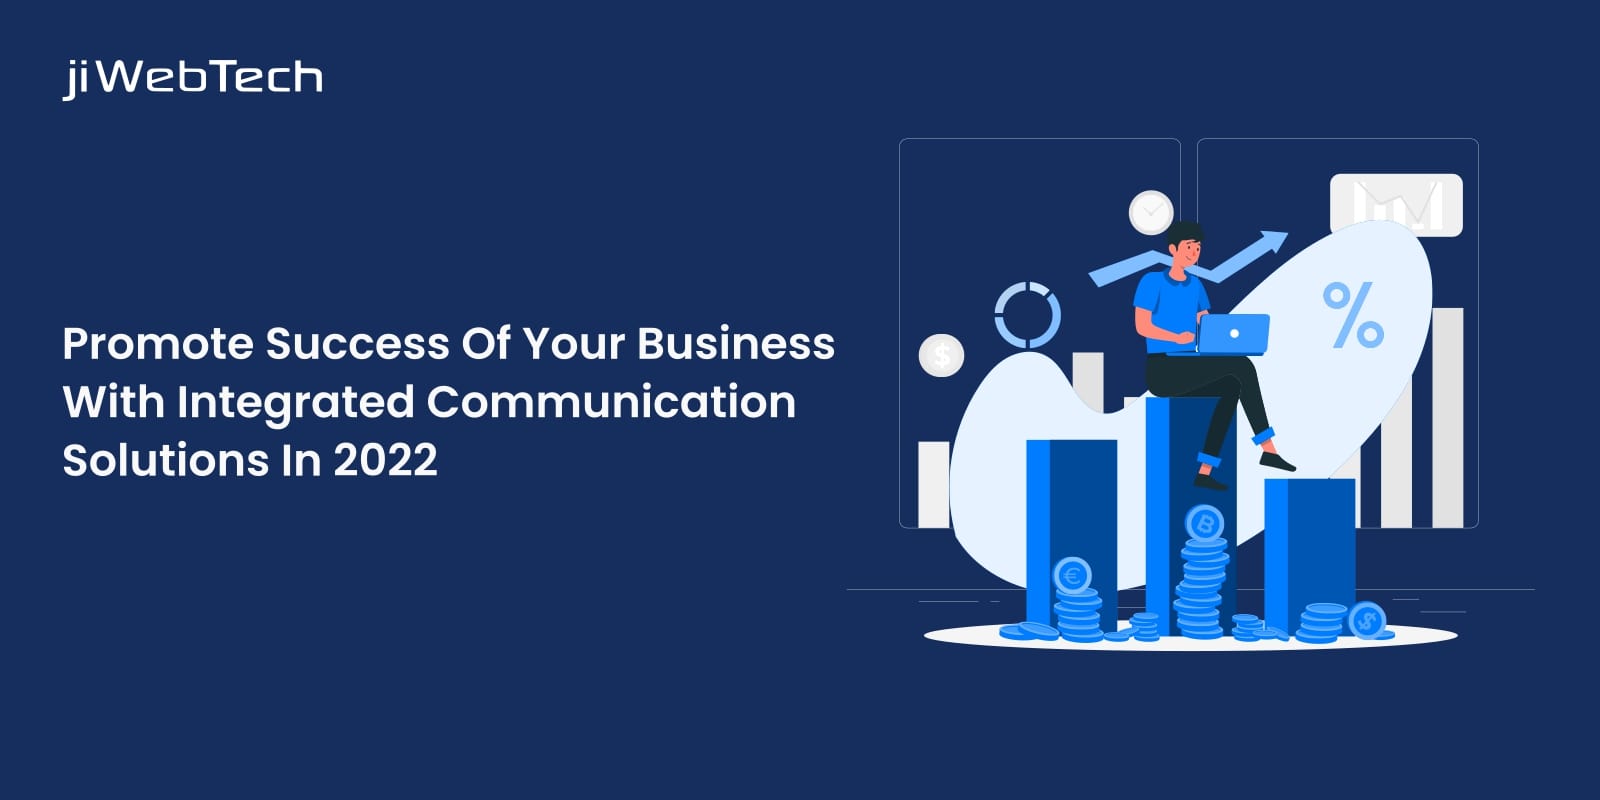 Promote Success Of Your Business With Integrated Communication Solutions In 2022